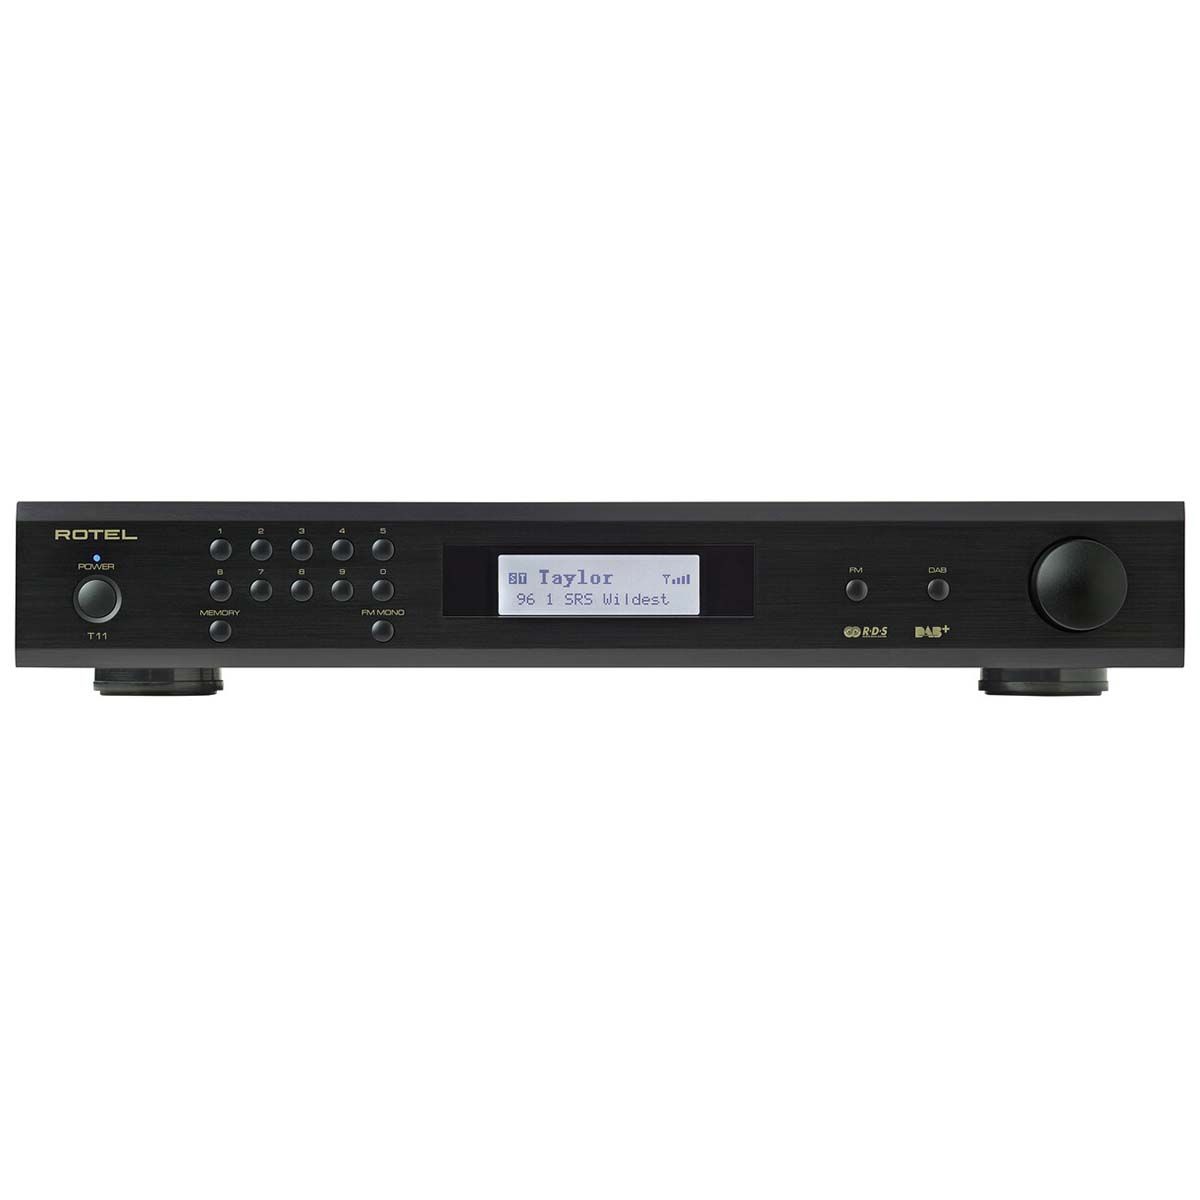 Rotel T11 Tuner, Black, front view